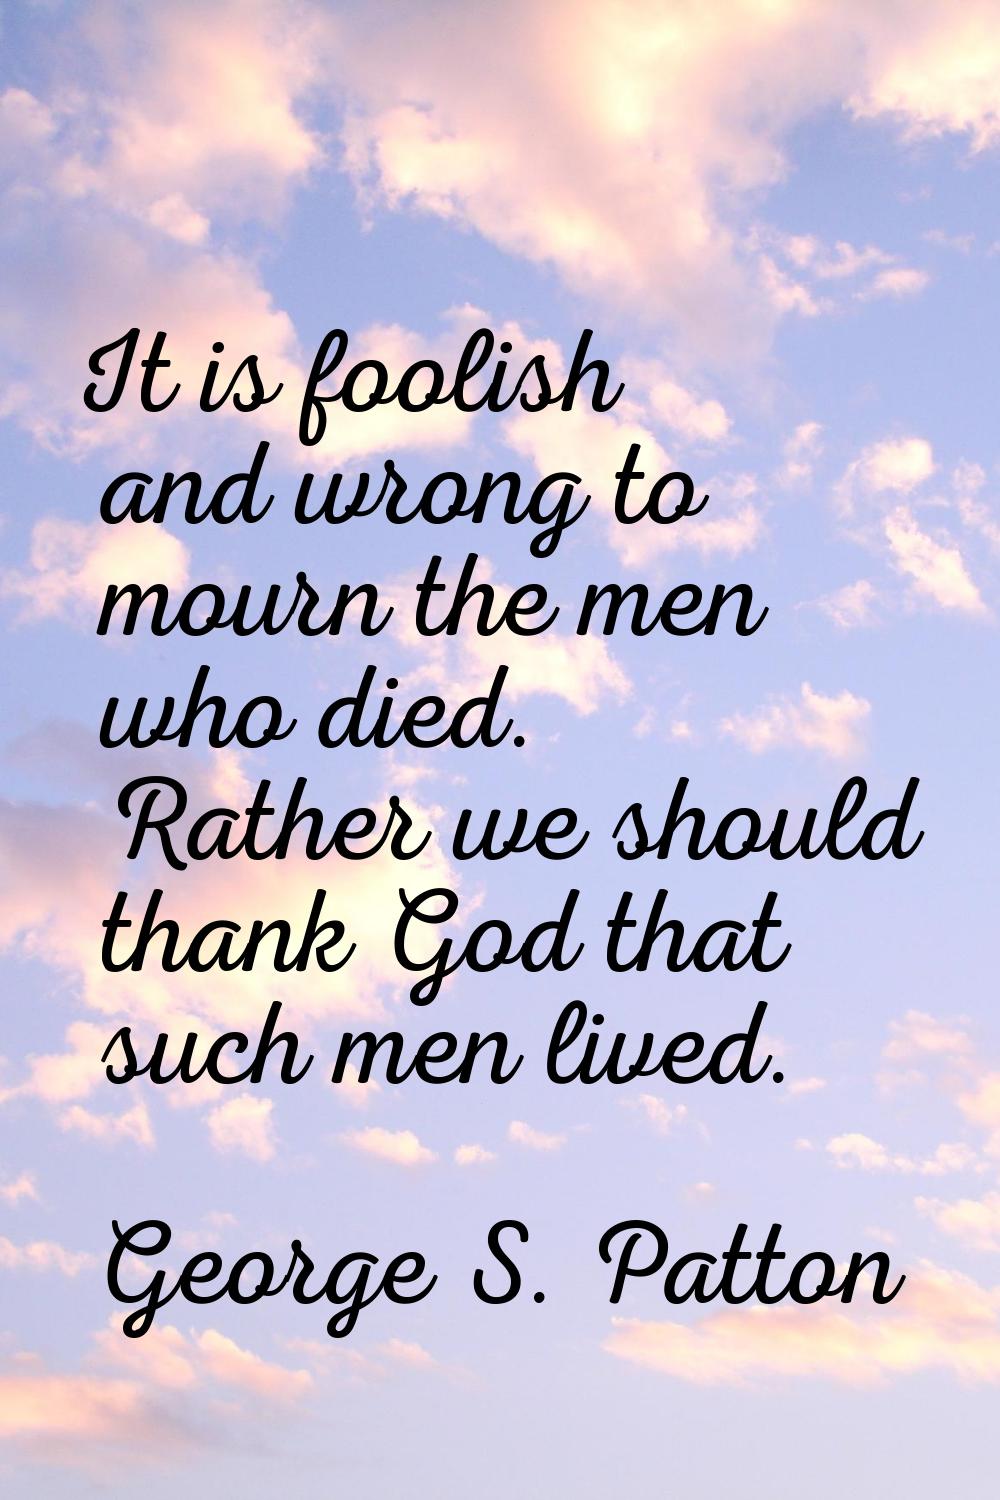 It is foolish and wrong to mourn the men who died. Rather we should thank God that such men lived.